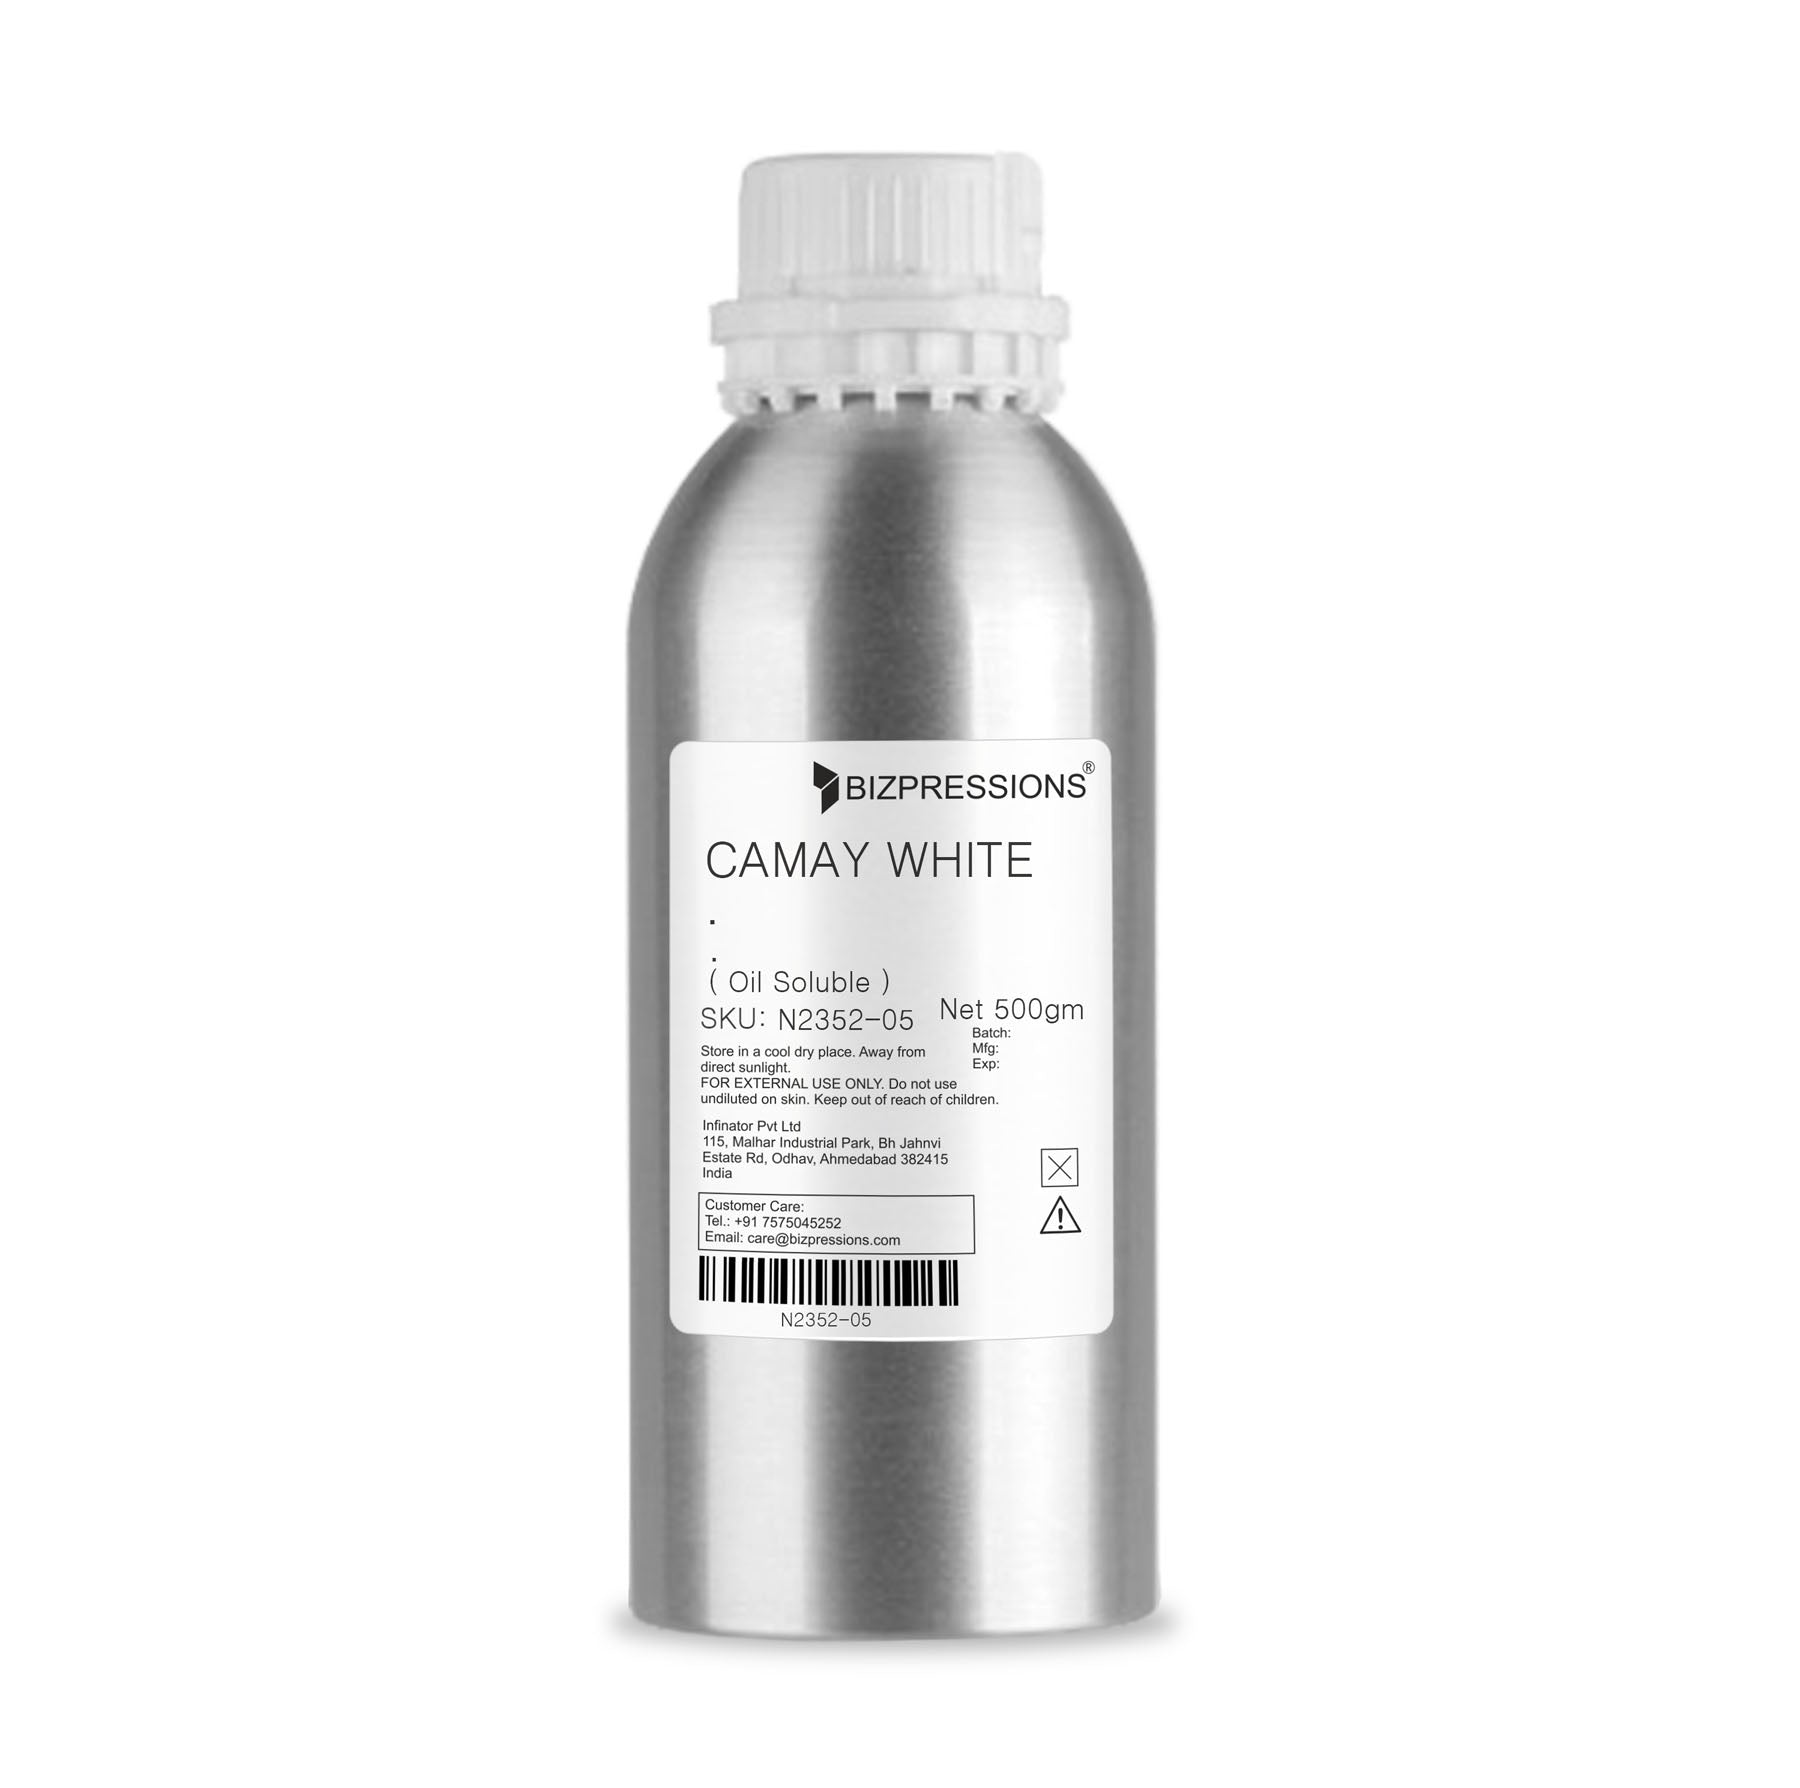 CAMAY WHITE - Fragrance ( Oil Soluble ) - 500 gm